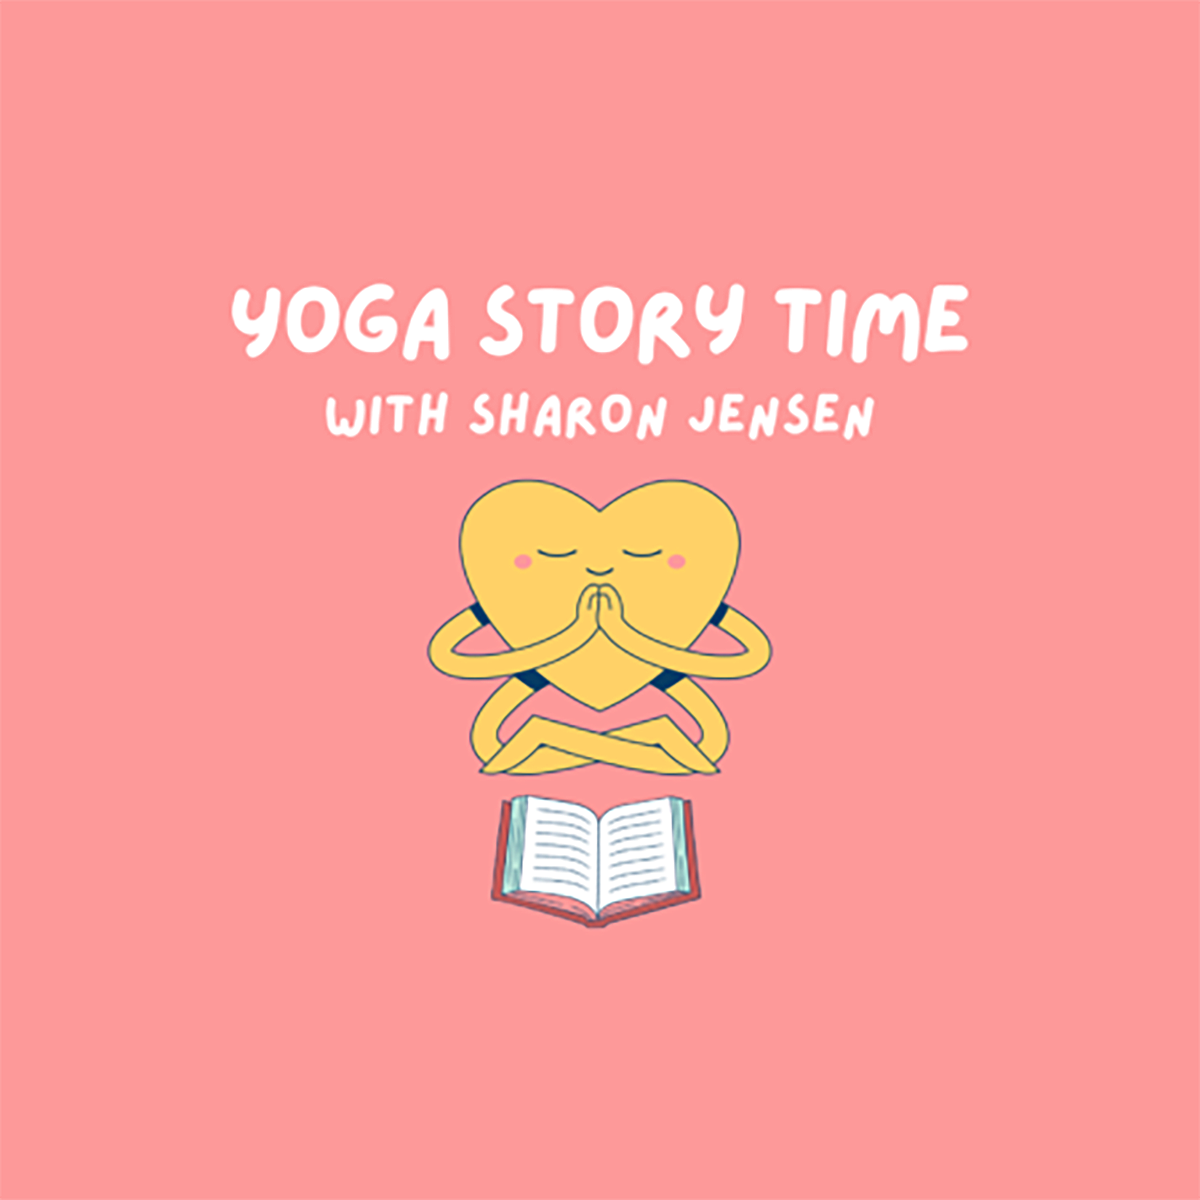 Yoga Story Time with Sharon Jensen